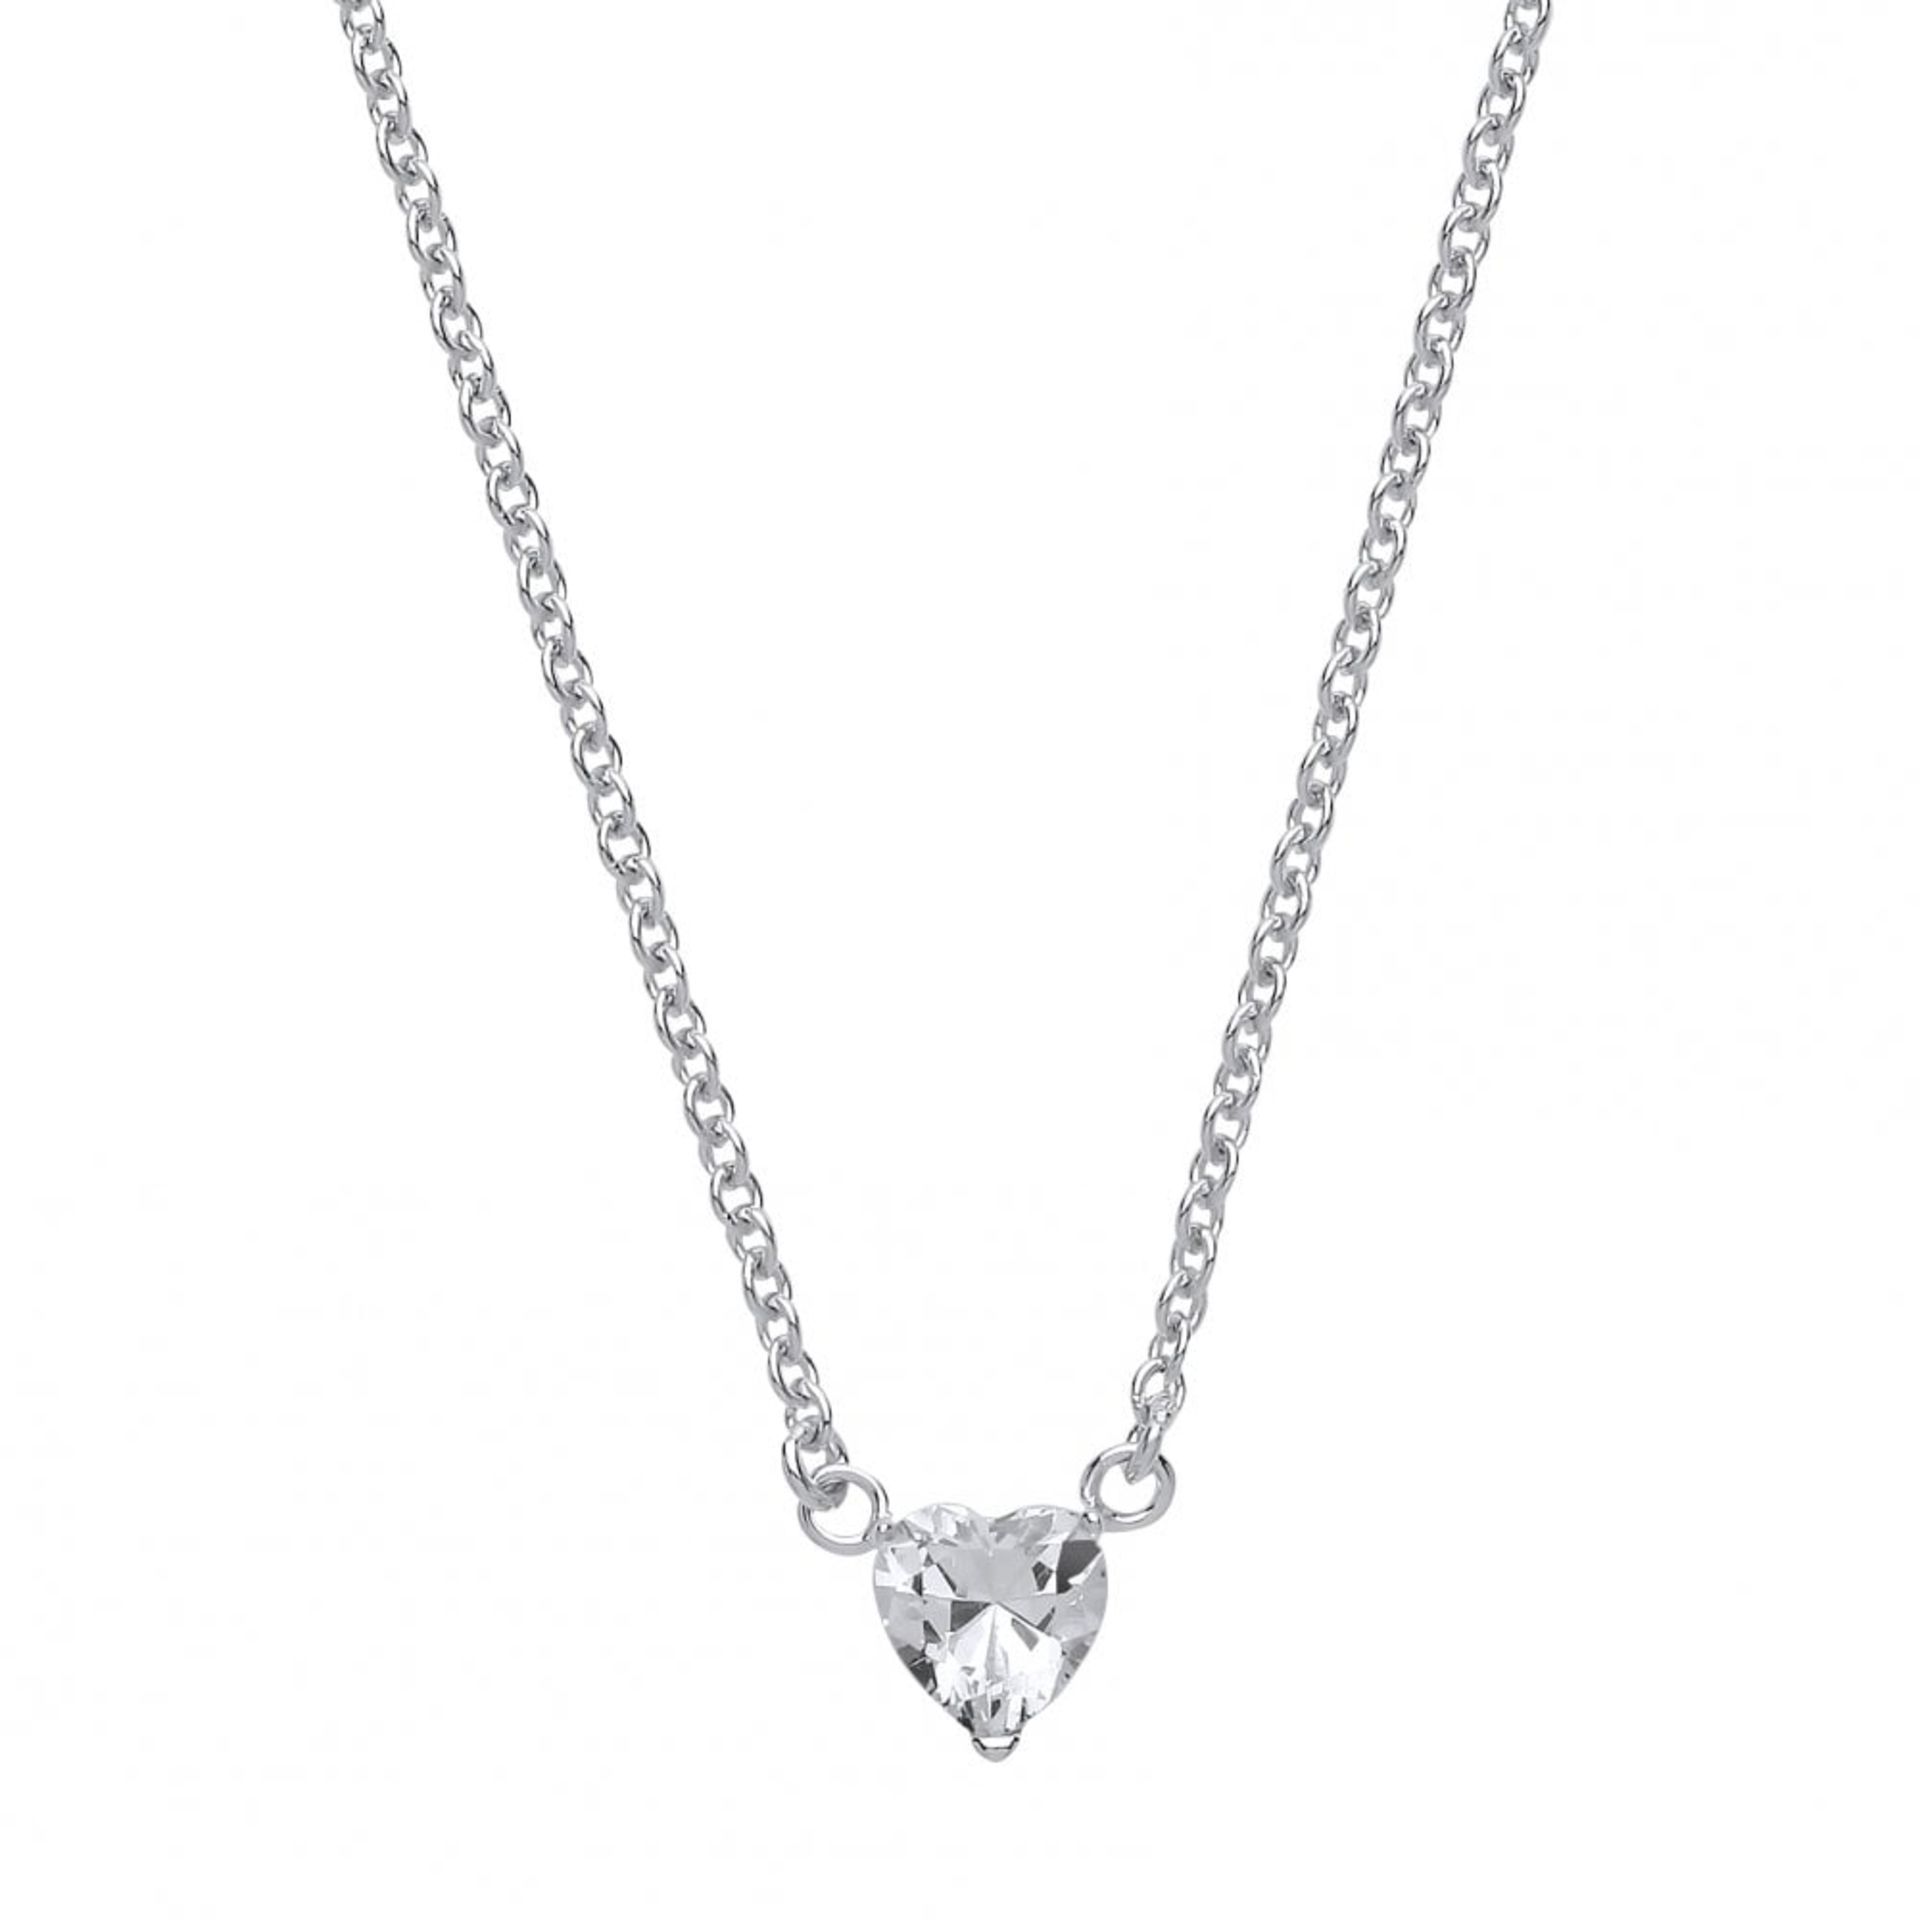 10 x White Cubic Zirconia Claw Set Heart Shaped Pendant With Necklace RRP £39.00